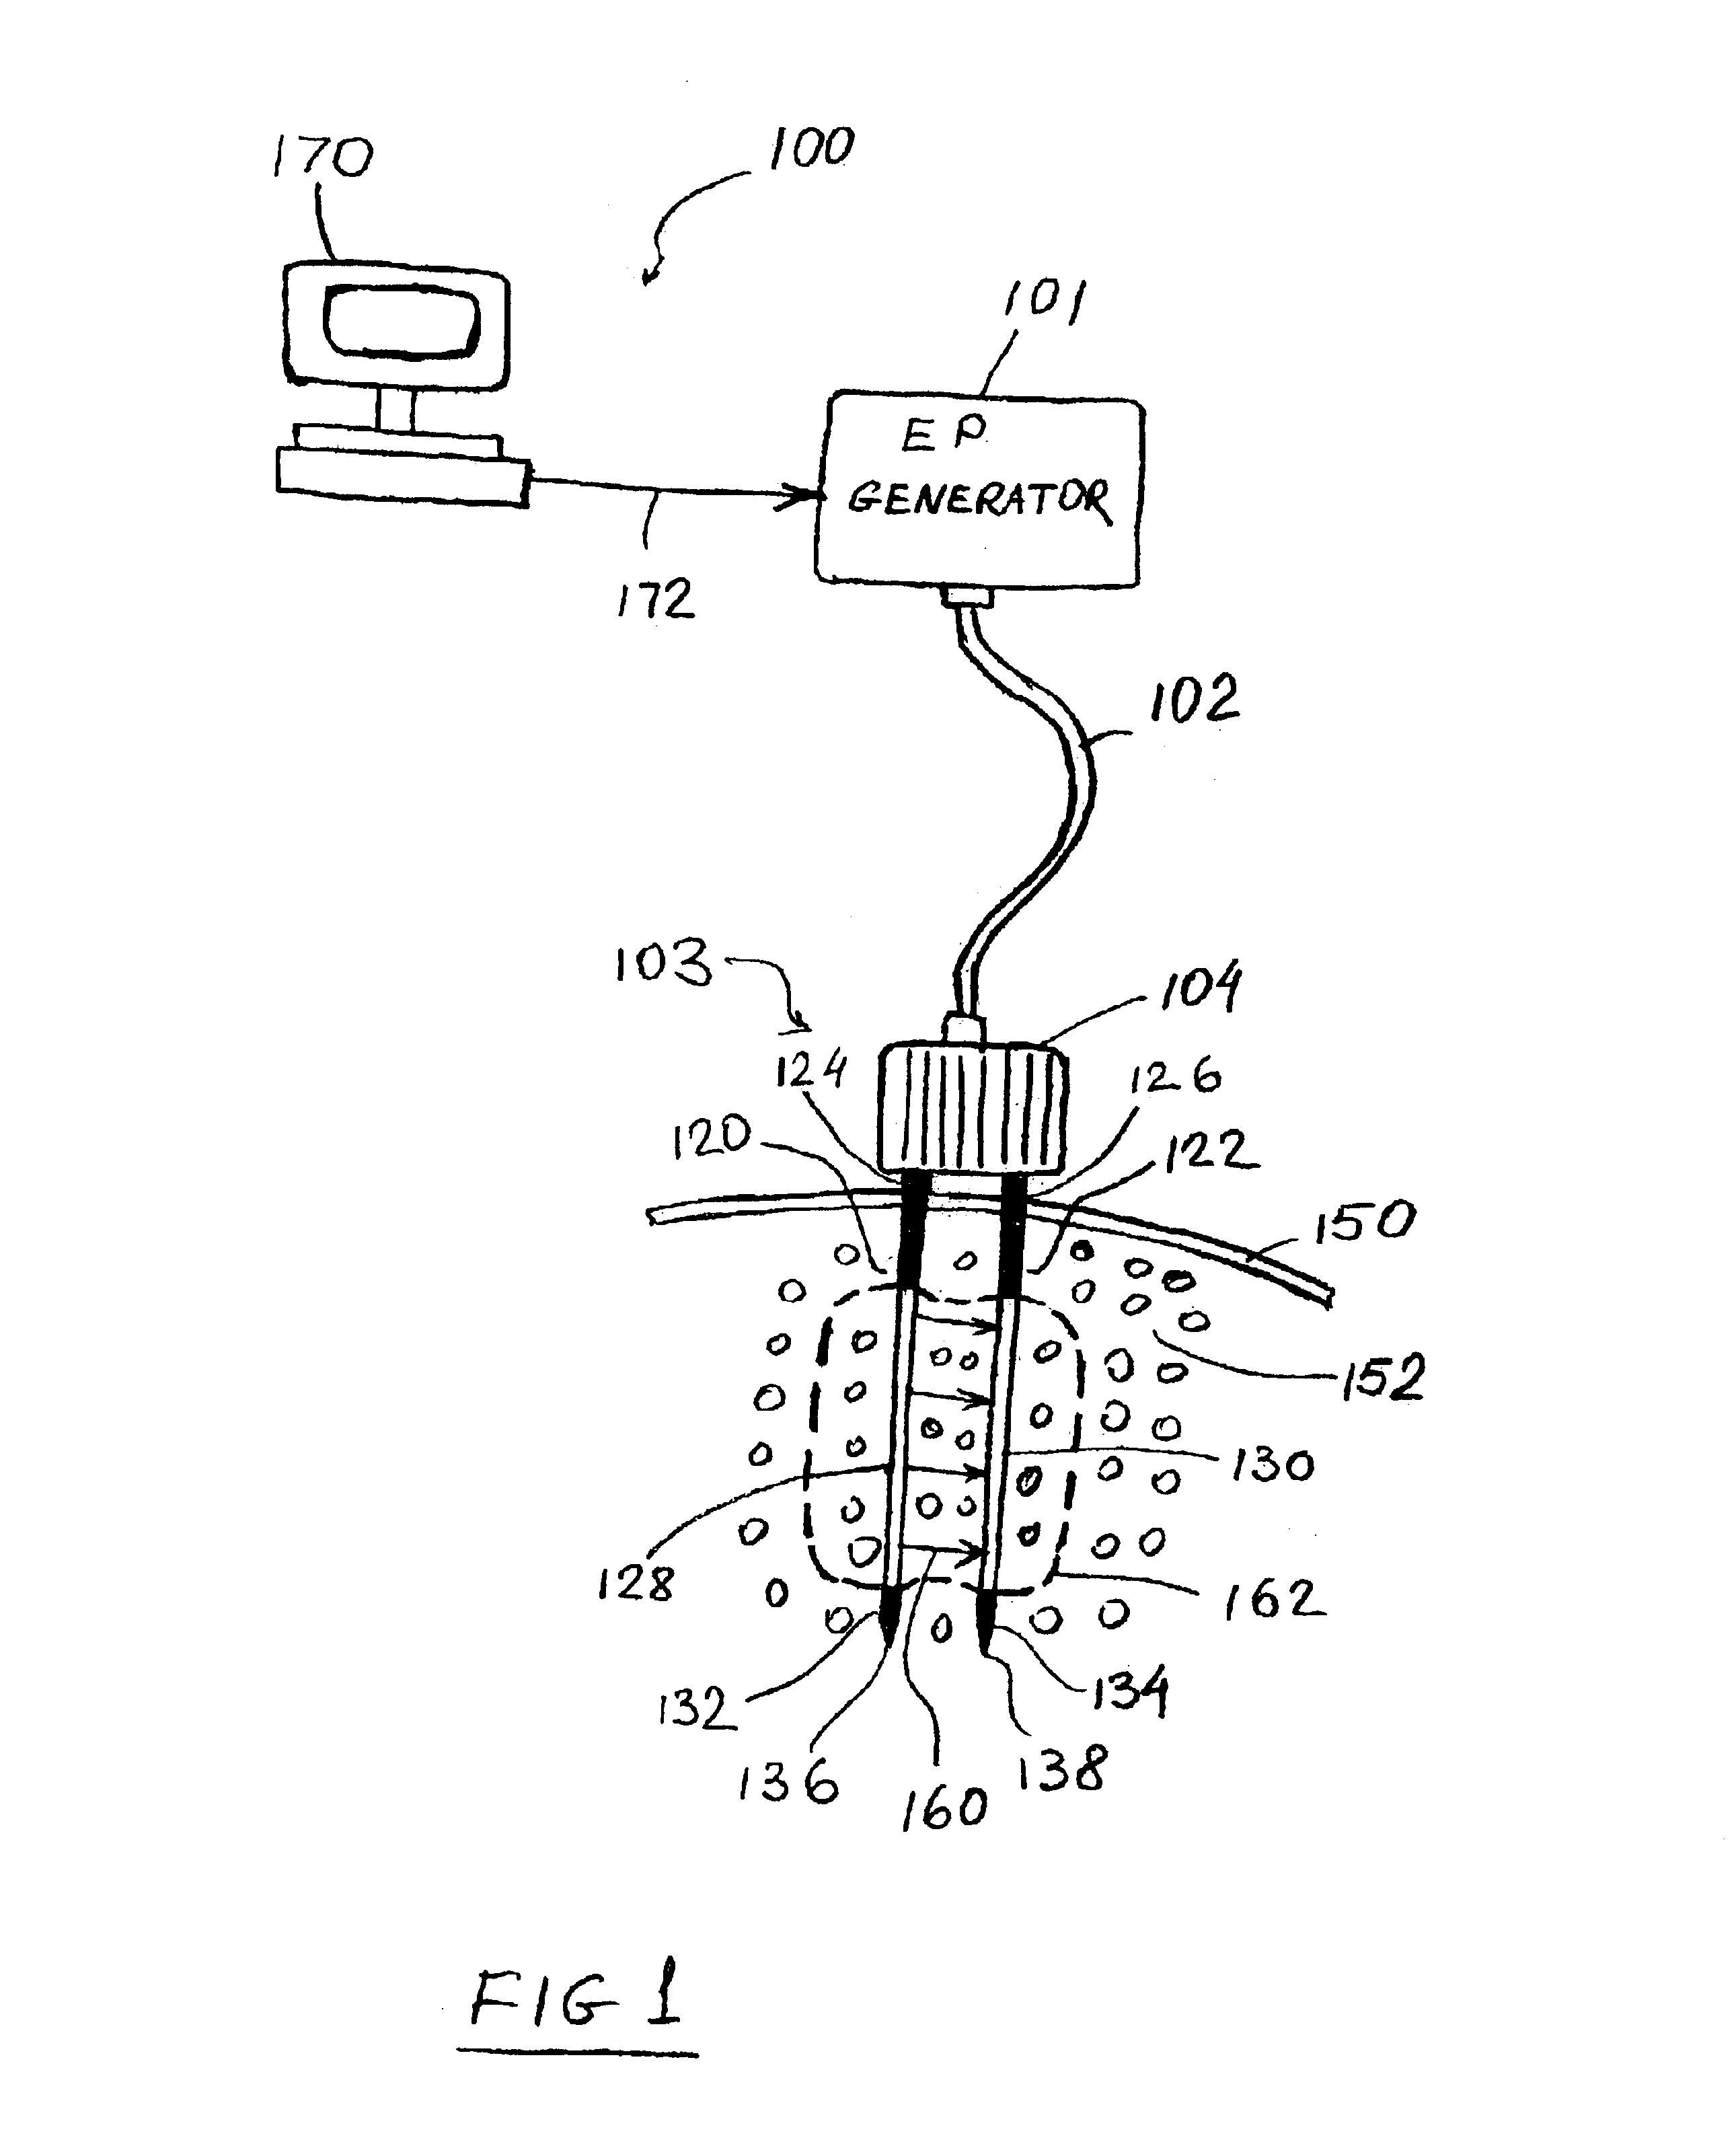 Apparatus and method for reducing subcutaneous fat deposits by electroporation